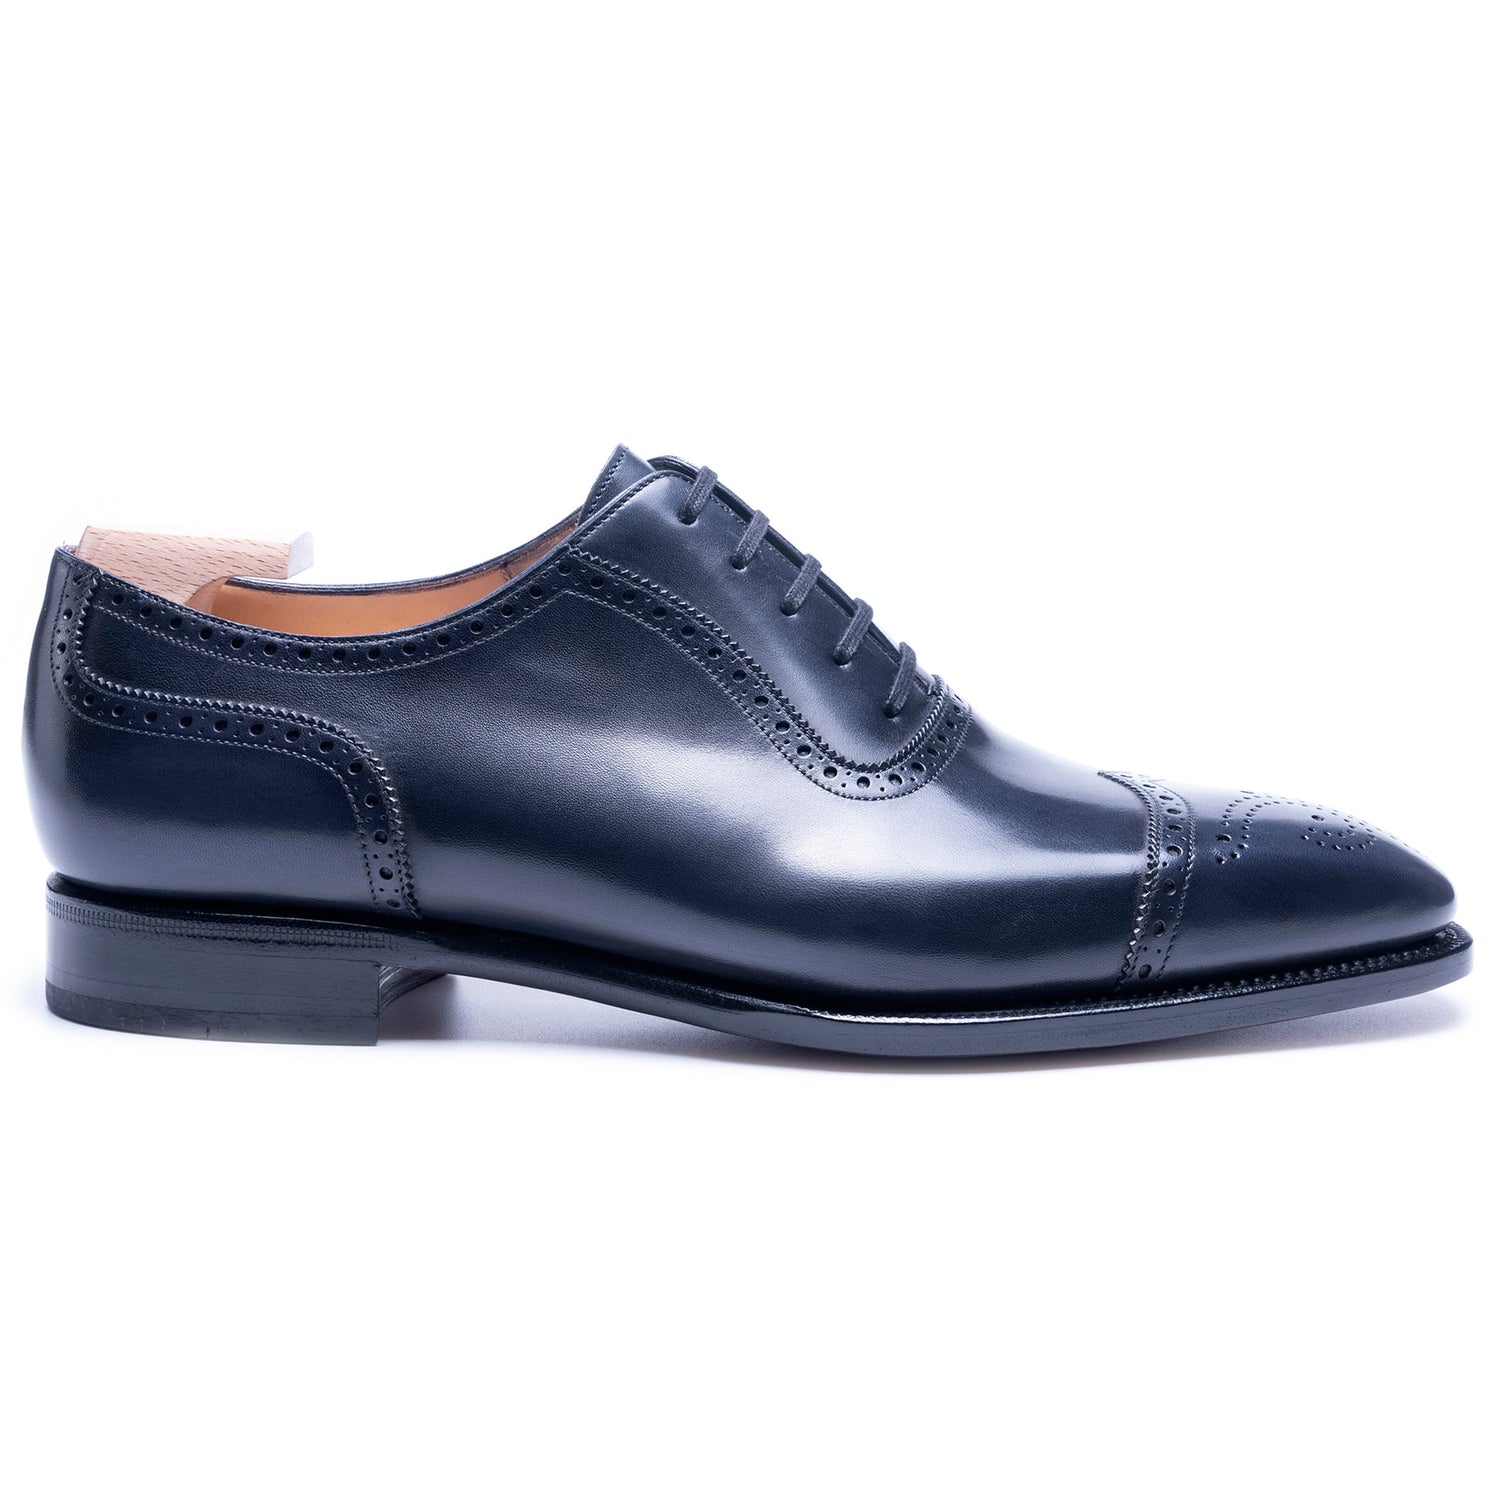 TLB Mallorca leather shoes 269 / PICASSO / VEGANO NAVY